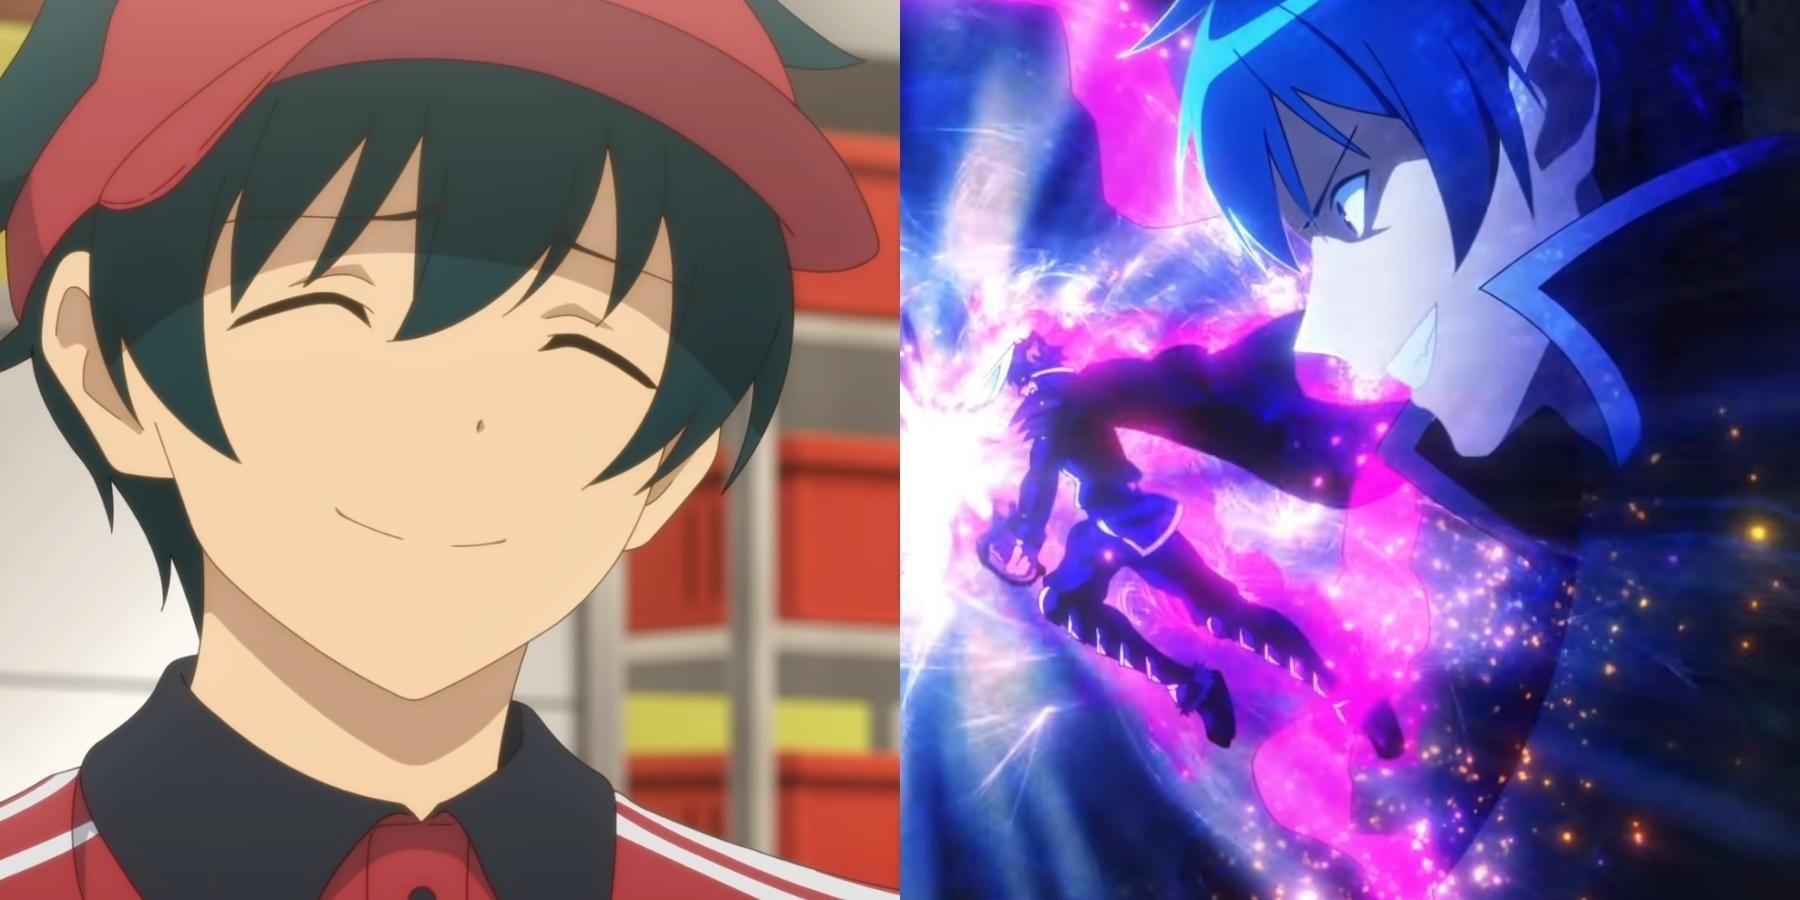 The Devil is a Part-Timer! Anime Review – Anime Rants